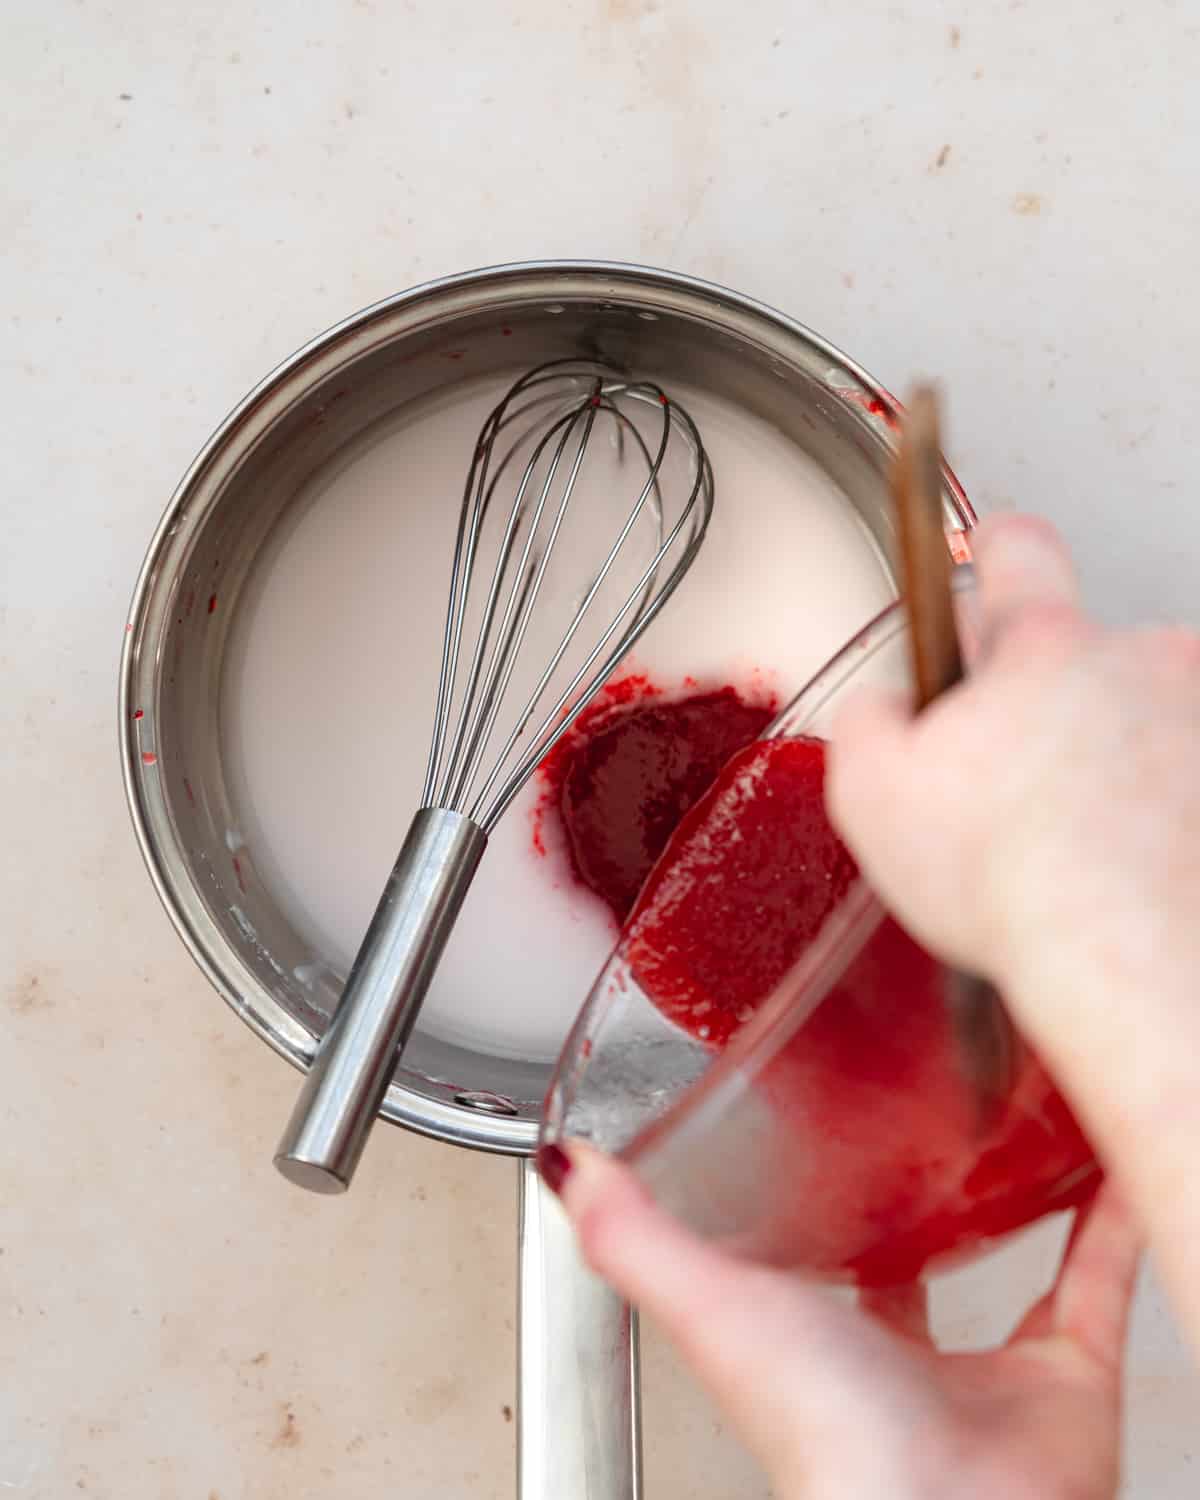 pouring raspberry coulis into a saucepan.